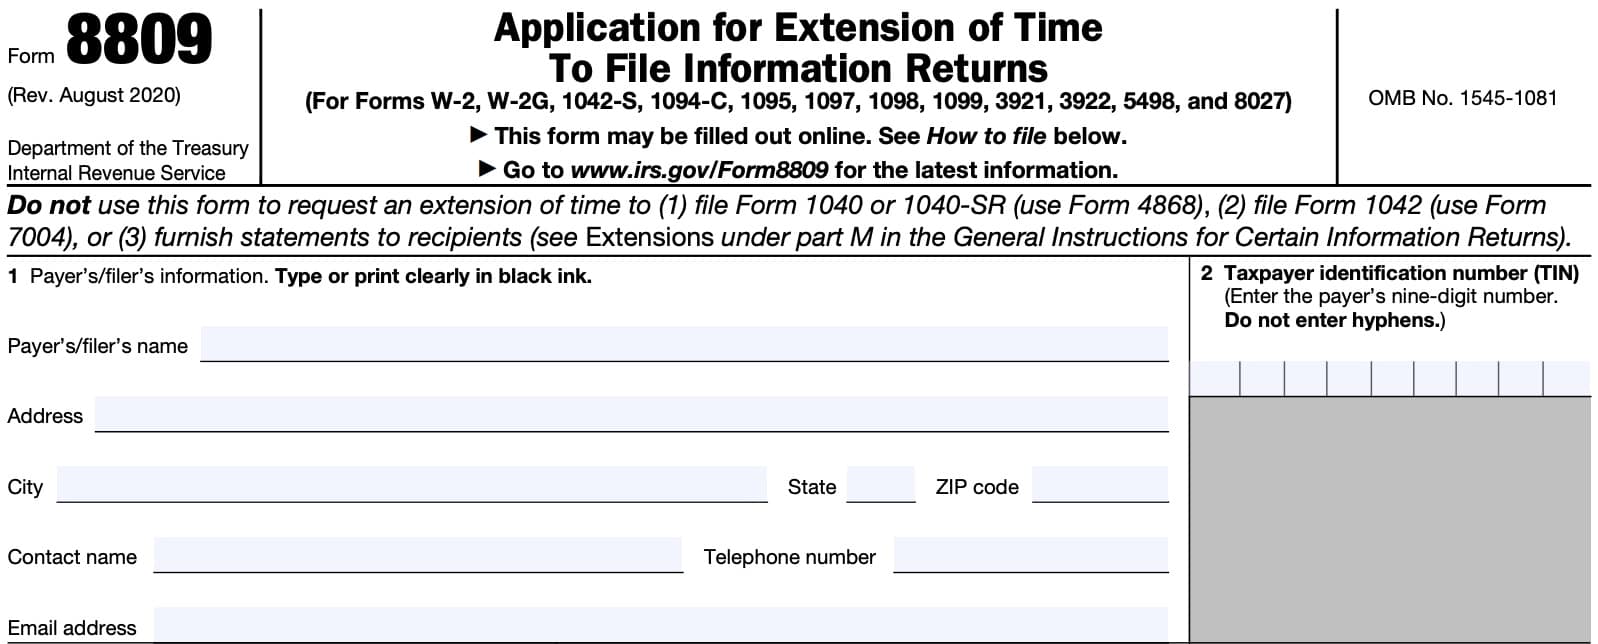 irs form 8809, application for extension of time to file information returns, lines 1 & 2